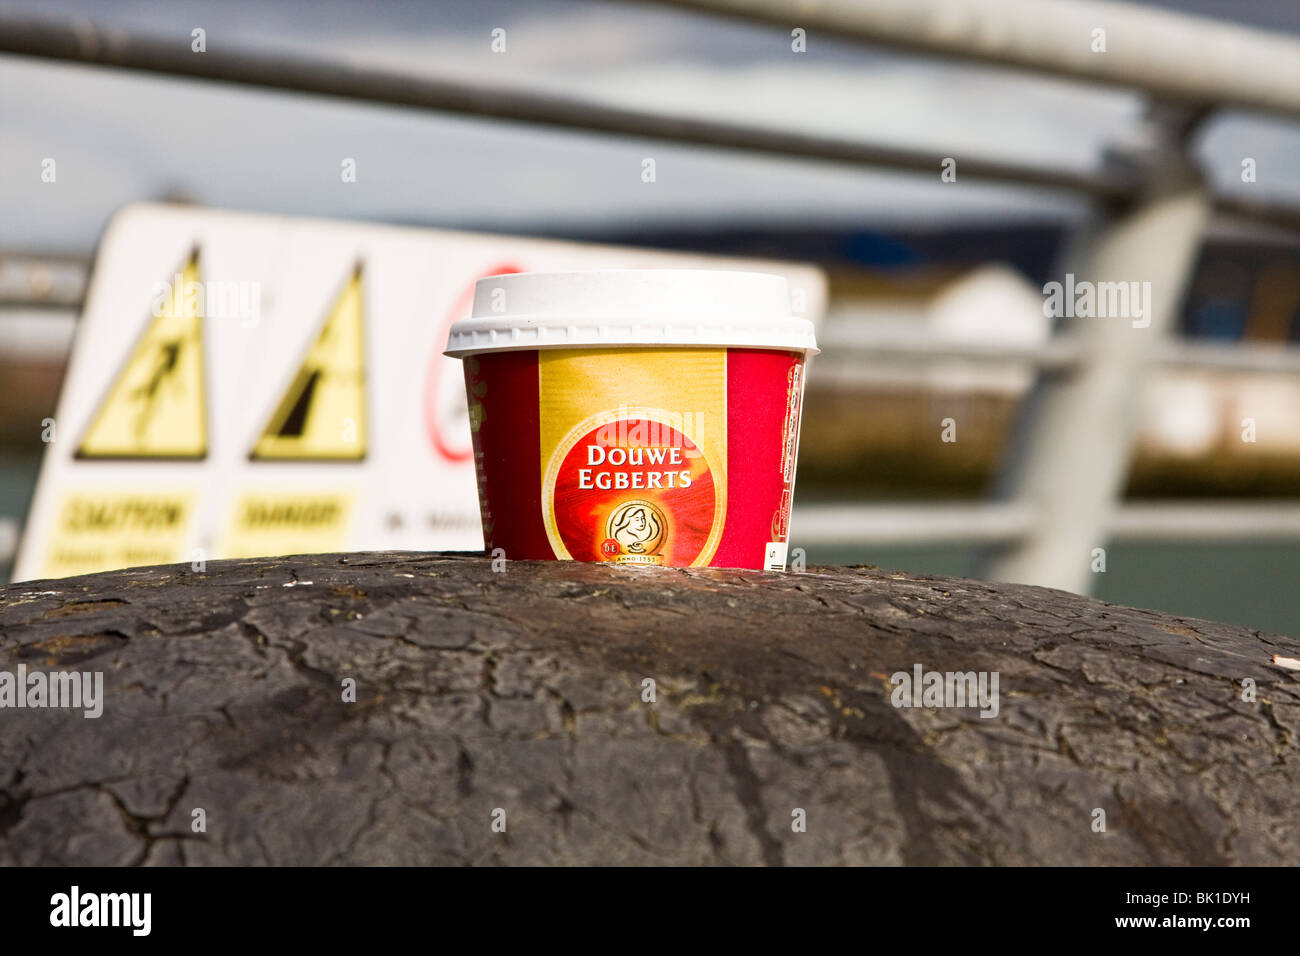 Douwe Egberts coffee cup on bollard with industrial background Stock Photo